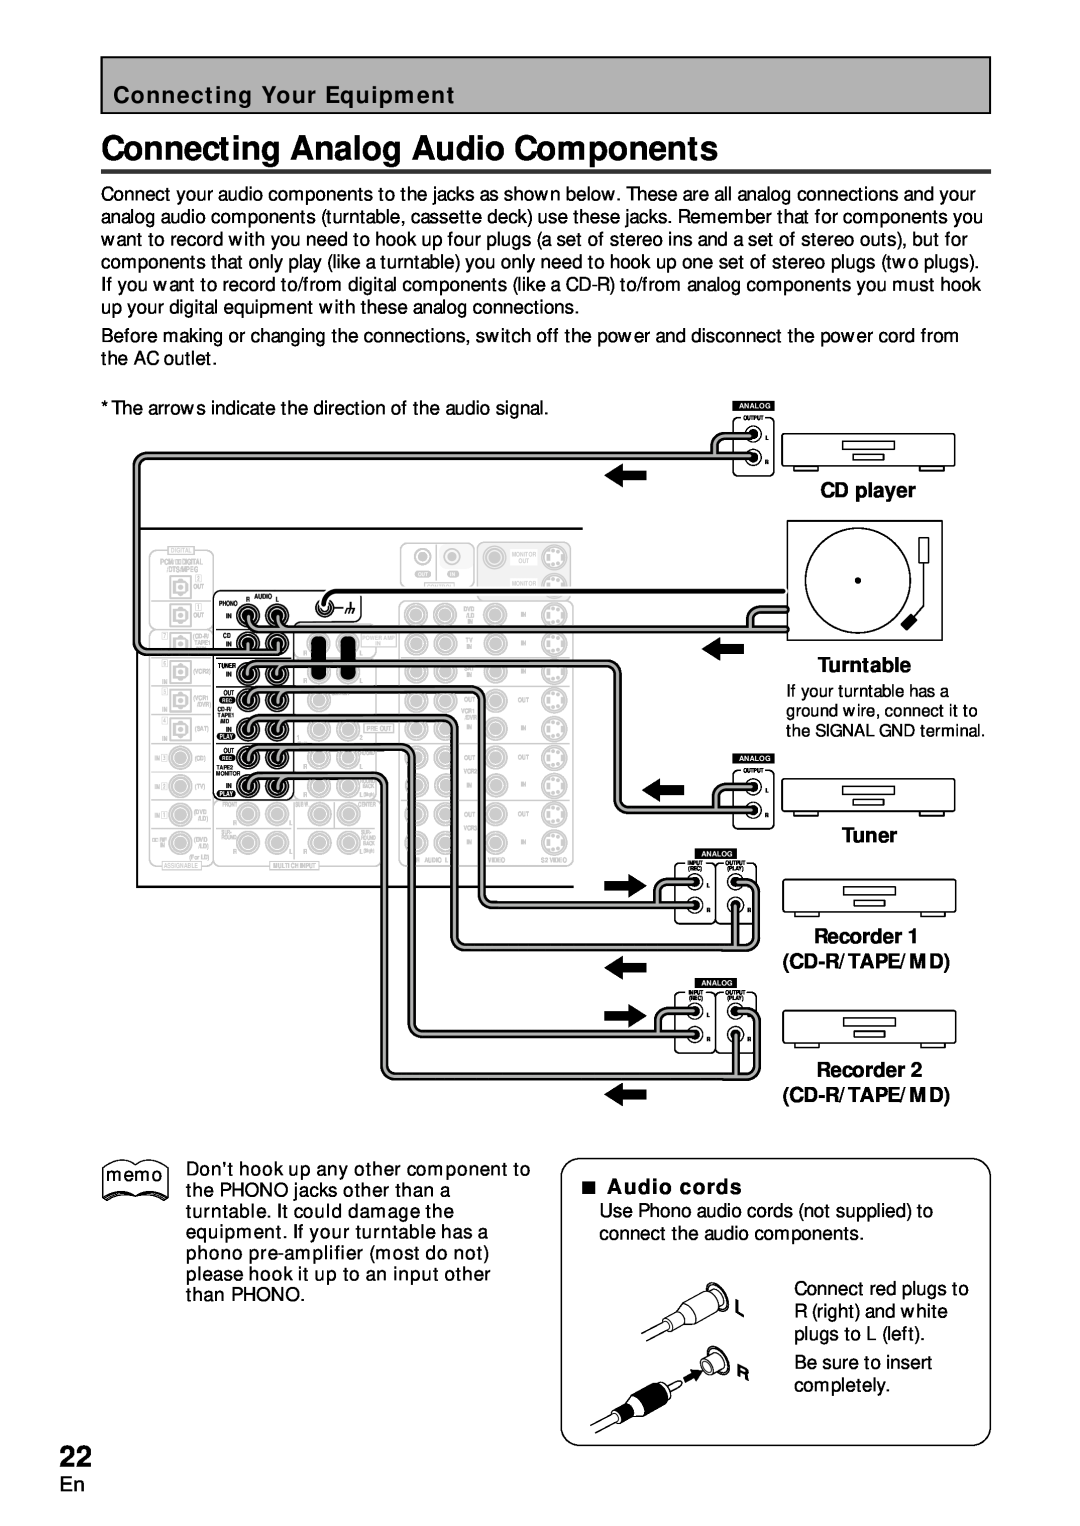 Pioneer VSA-AX10 operating instructions Connecting Analog Audio Components, CD player, Turntable, Tuner 